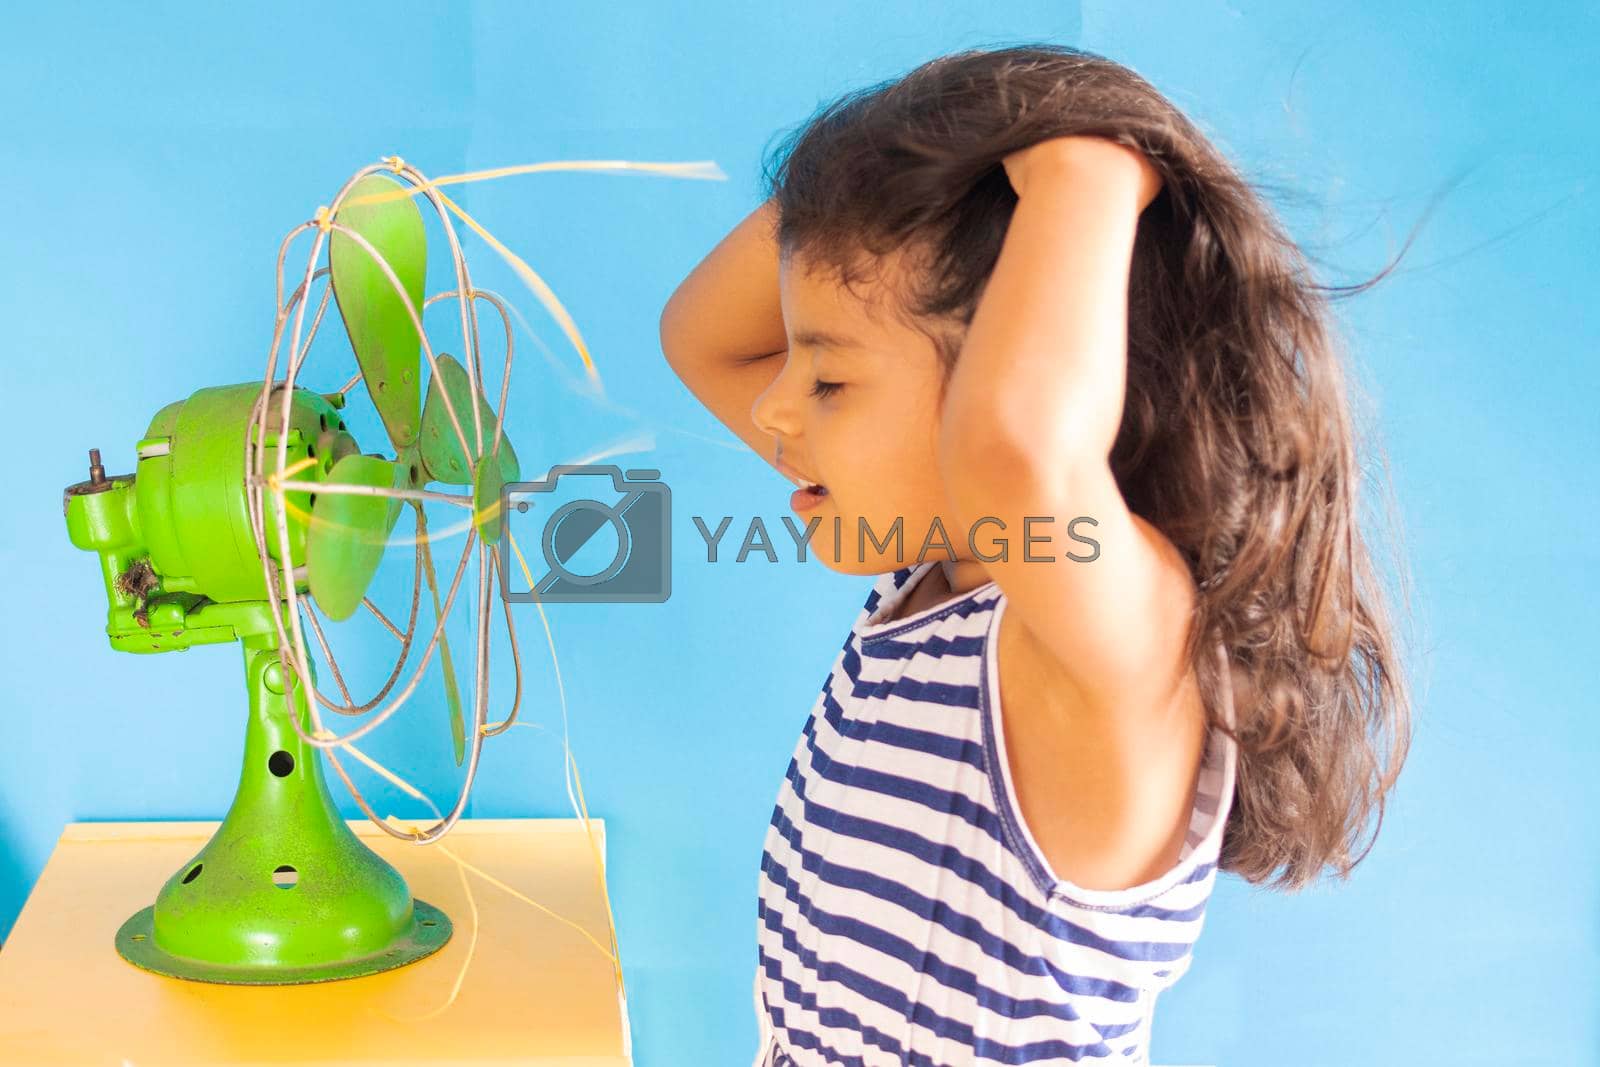 Royalty free image of Beautiful girl, is cooling off the heat with an old green fan by eagg13